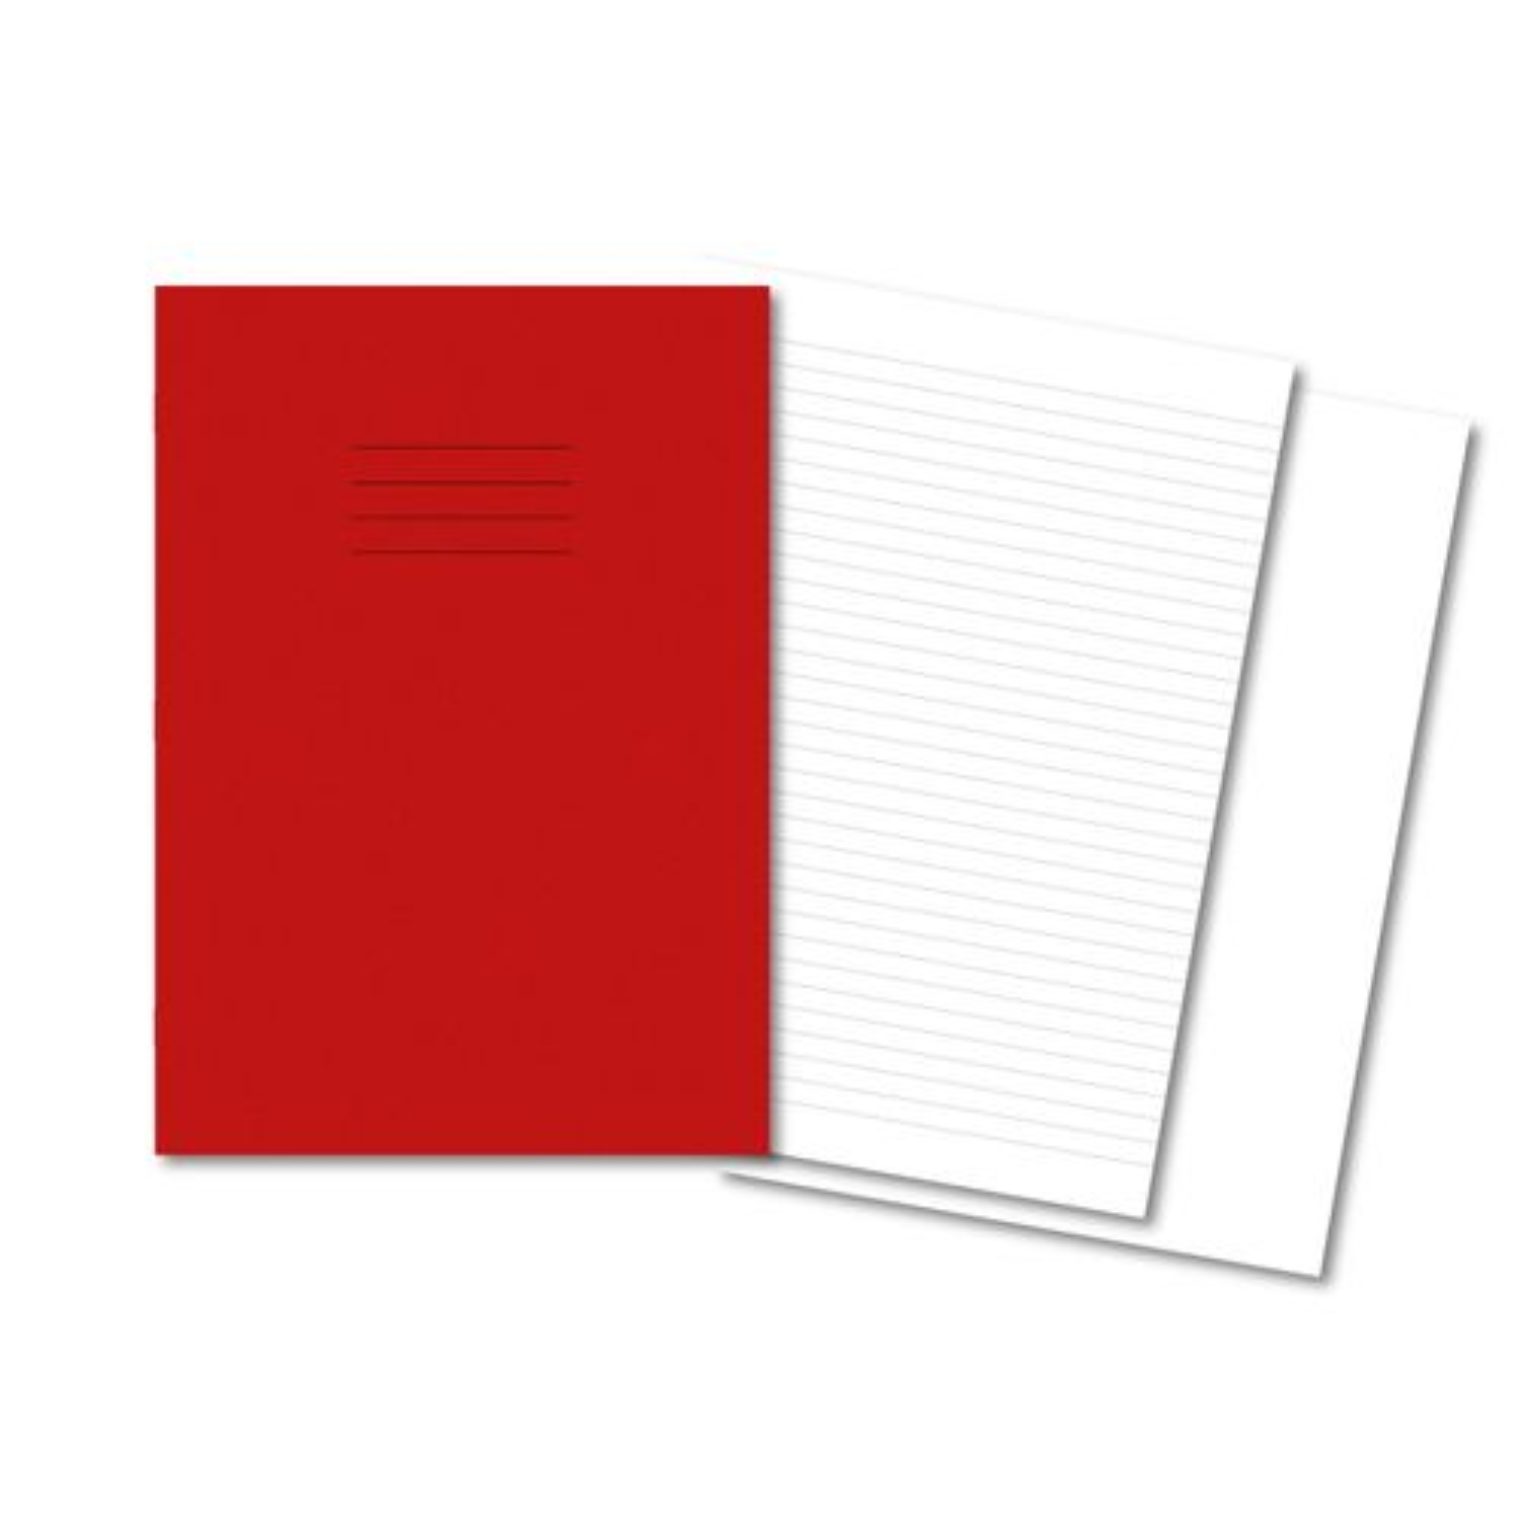 Exercise Book A4 8mm Ruled and Plain Alt Red